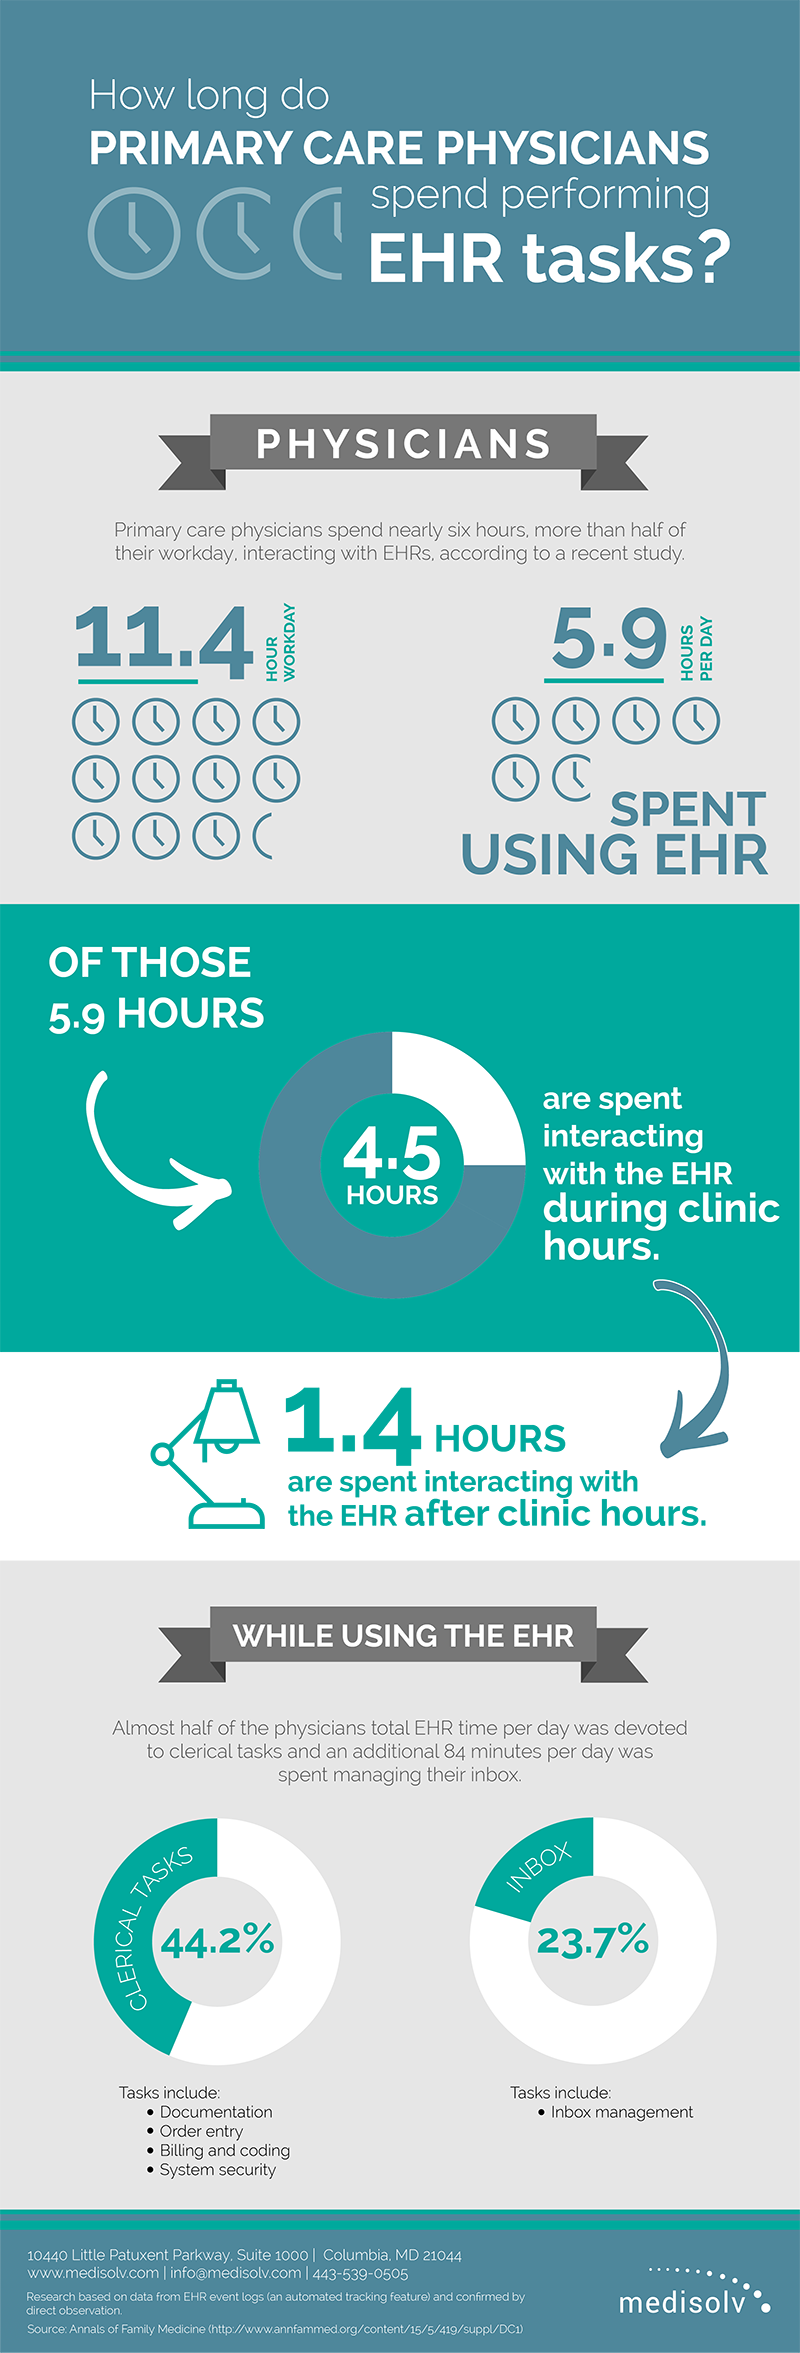 How Much Time Do Physicians Spend With Their EHR?